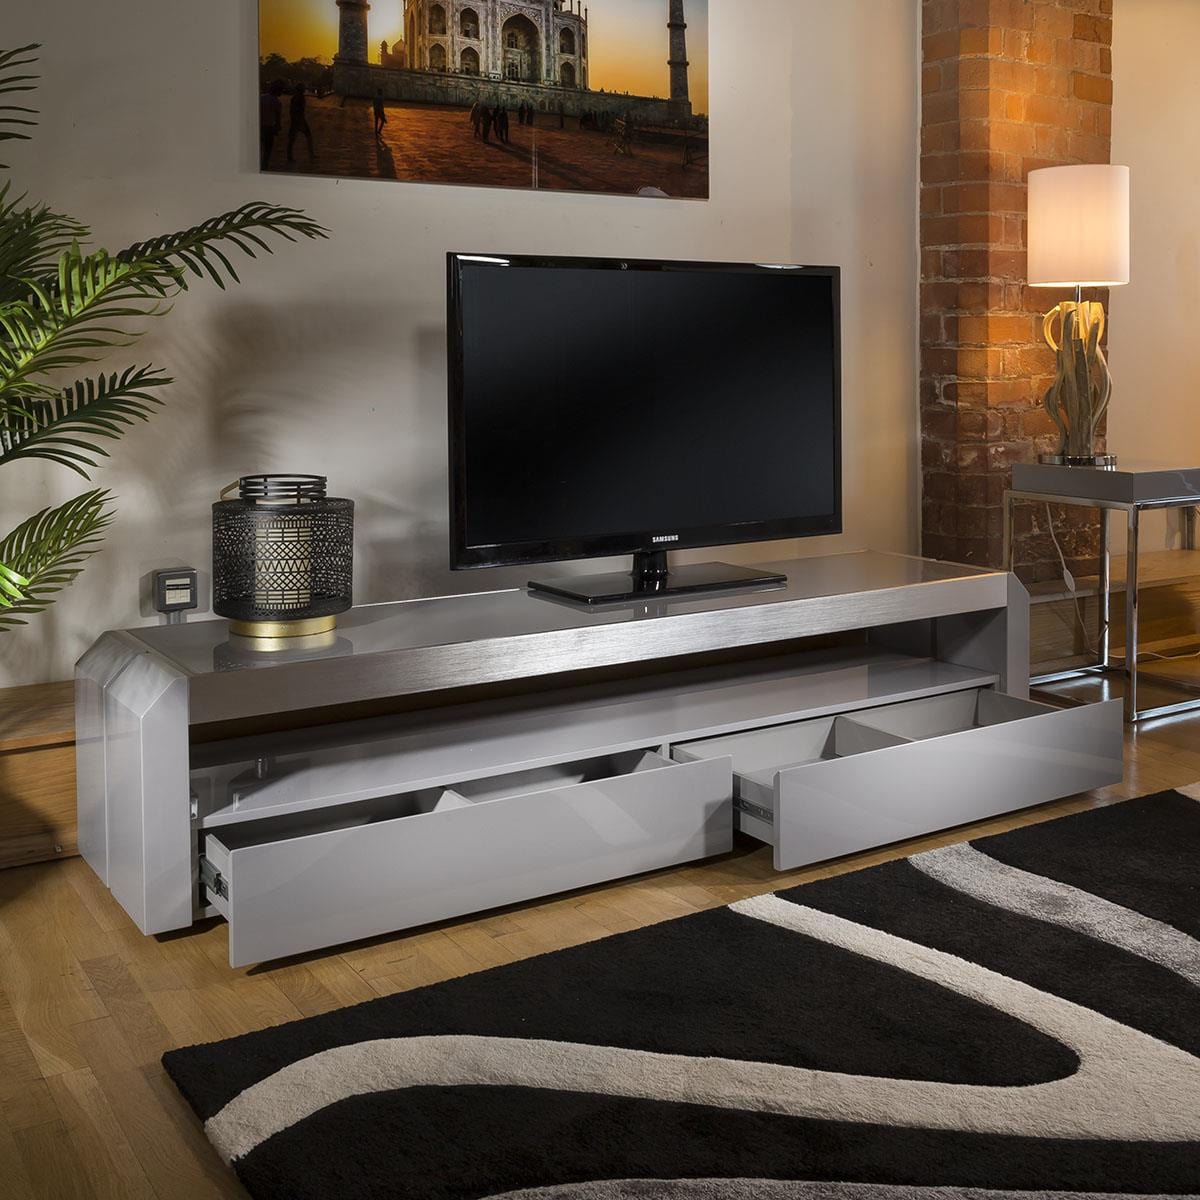 Quatropi Modern Grey TV Cabinet Grey Gloss 200 cm Unit / Stainless with Glass Top